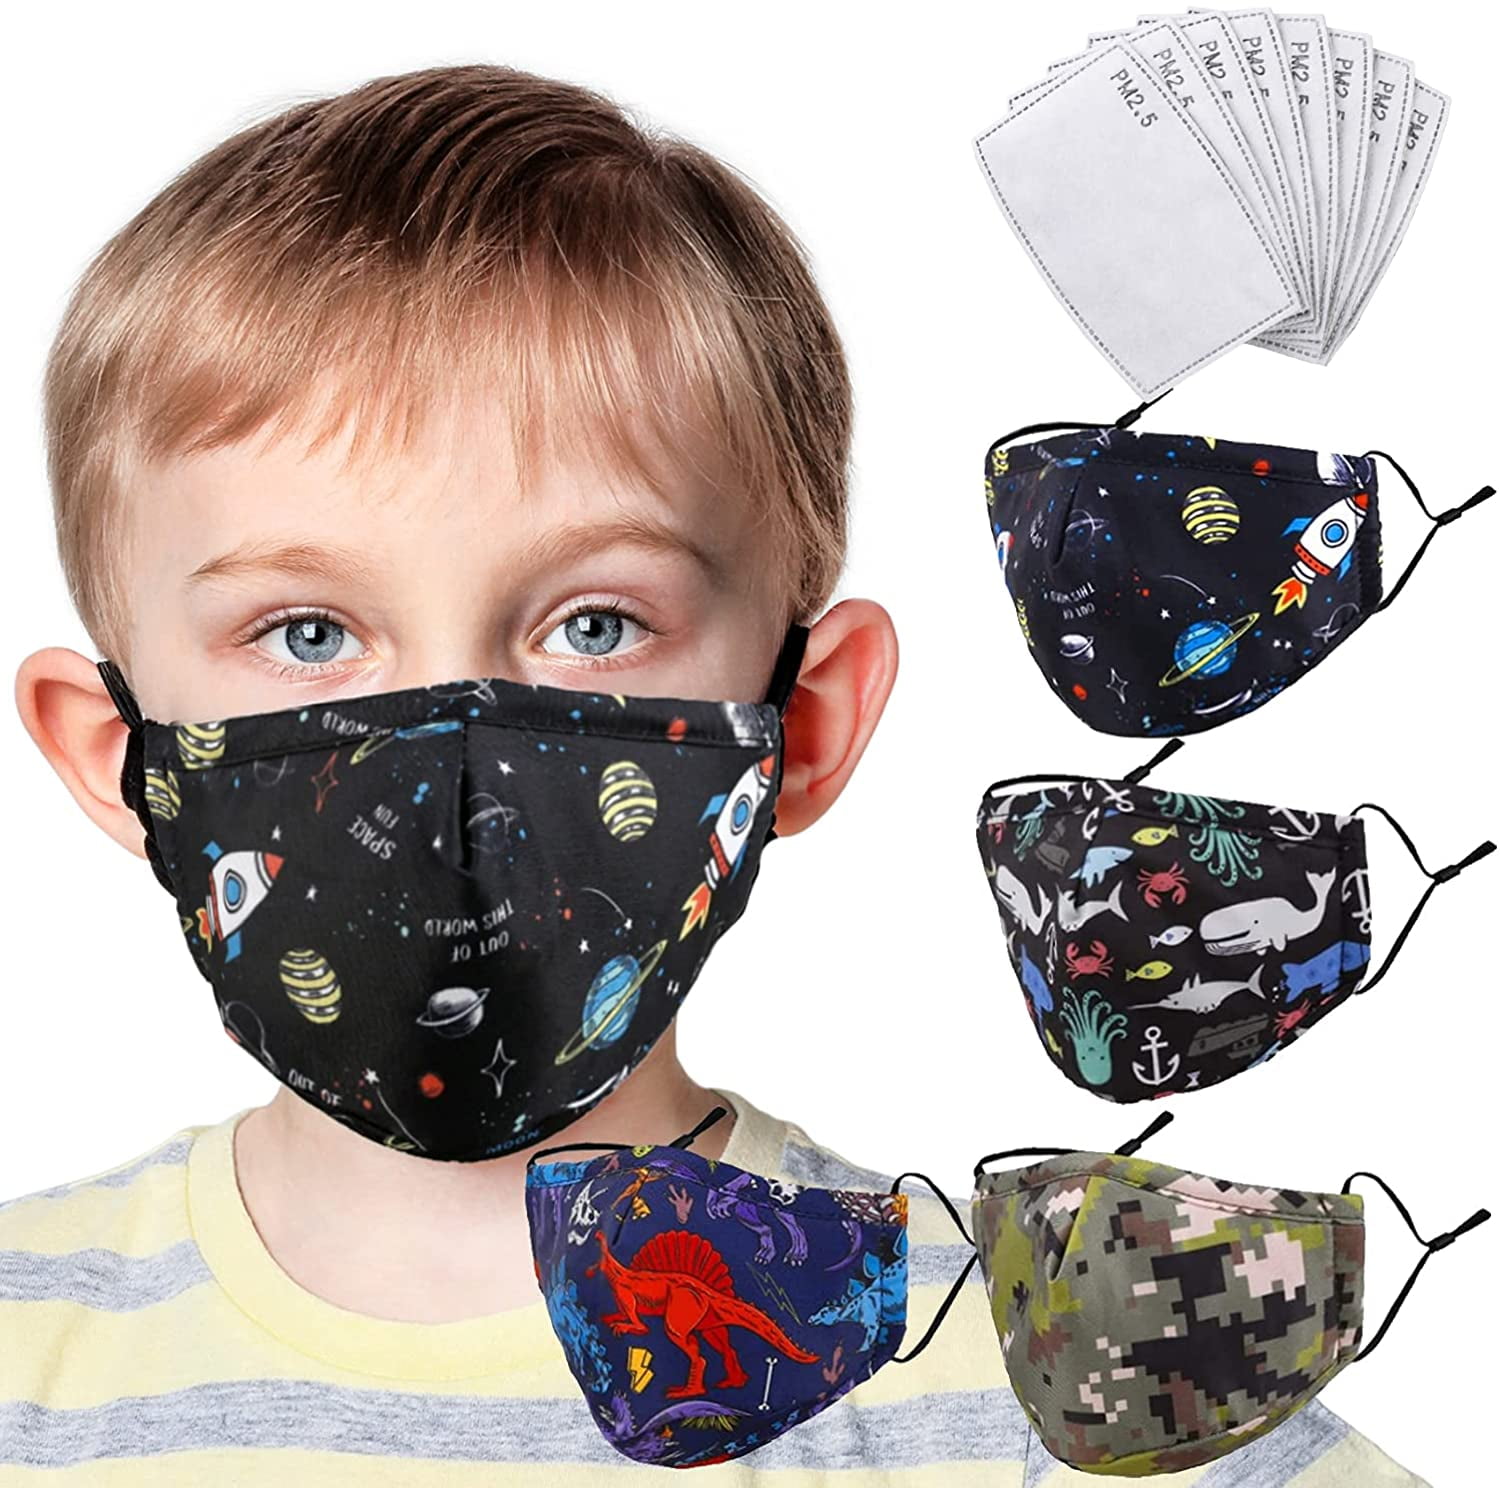 Weginte Kids Reusable Face Bandanas Cover Children Breathable Mouth Covering Protective Outdoor Activities with Cute Pattern 